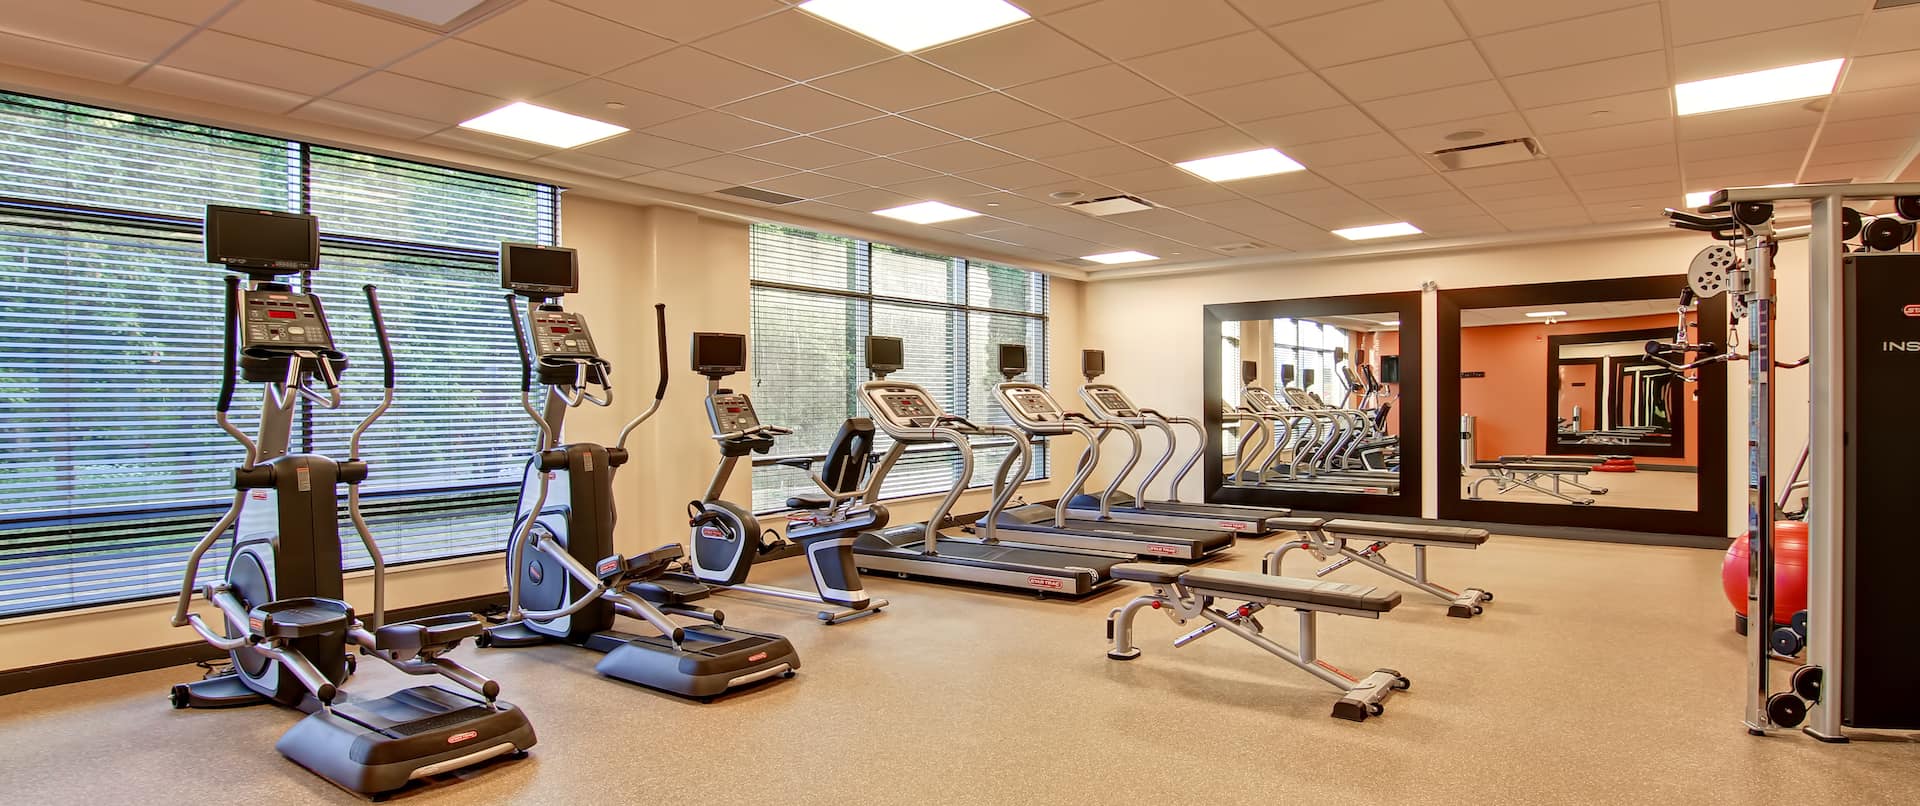 Fitness Room With Cardio Equipment Facing Large Windows, Weight Benches, Two Large Mirrors, Red Exercise Ball, and Weight Machine